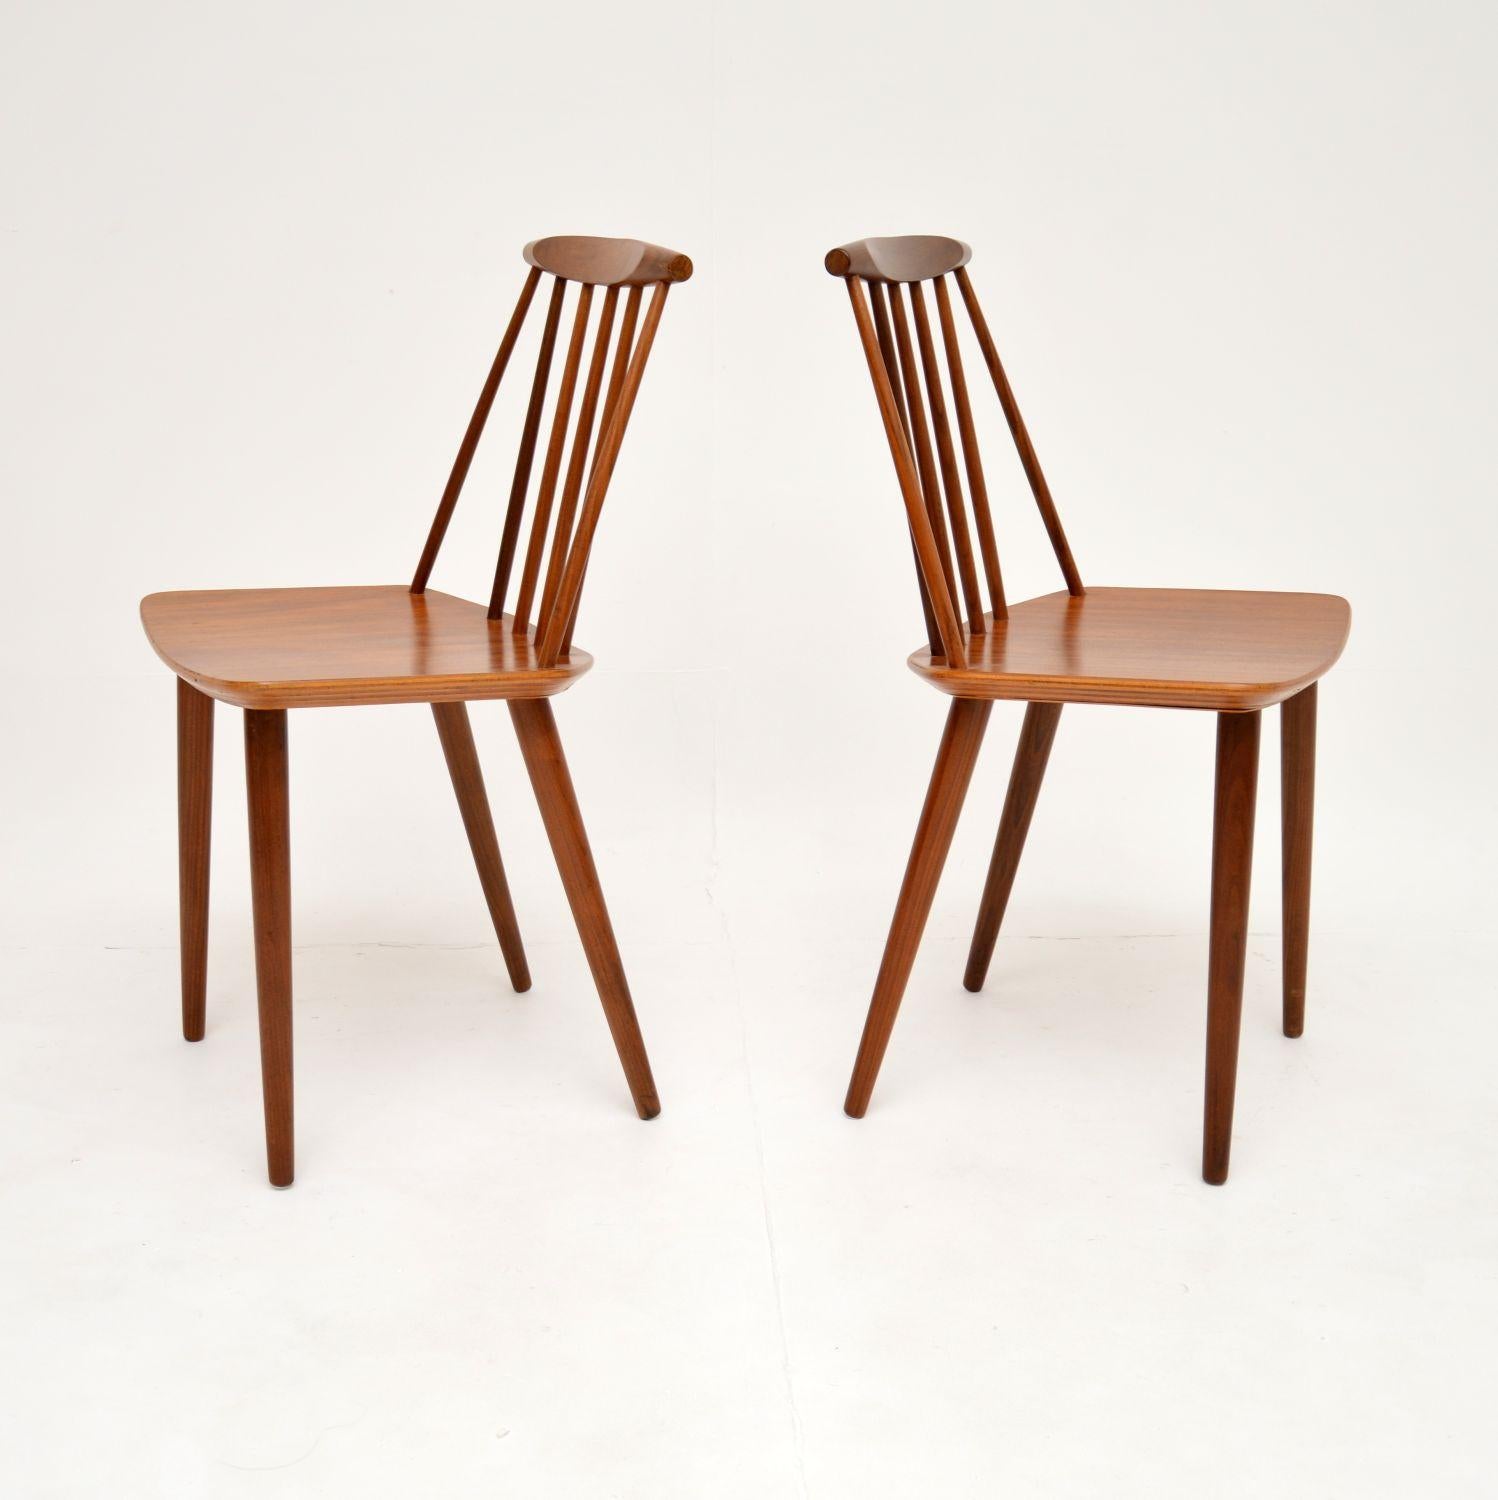 A stylish and extremely well made pair of Danish vintage dining chairs in teak. They were designed by Folke Palsson and were made in Denmark by FDB Mobler in the 1960’s.

They are of amazing quality. This iconic design is sturdy and comfortable to